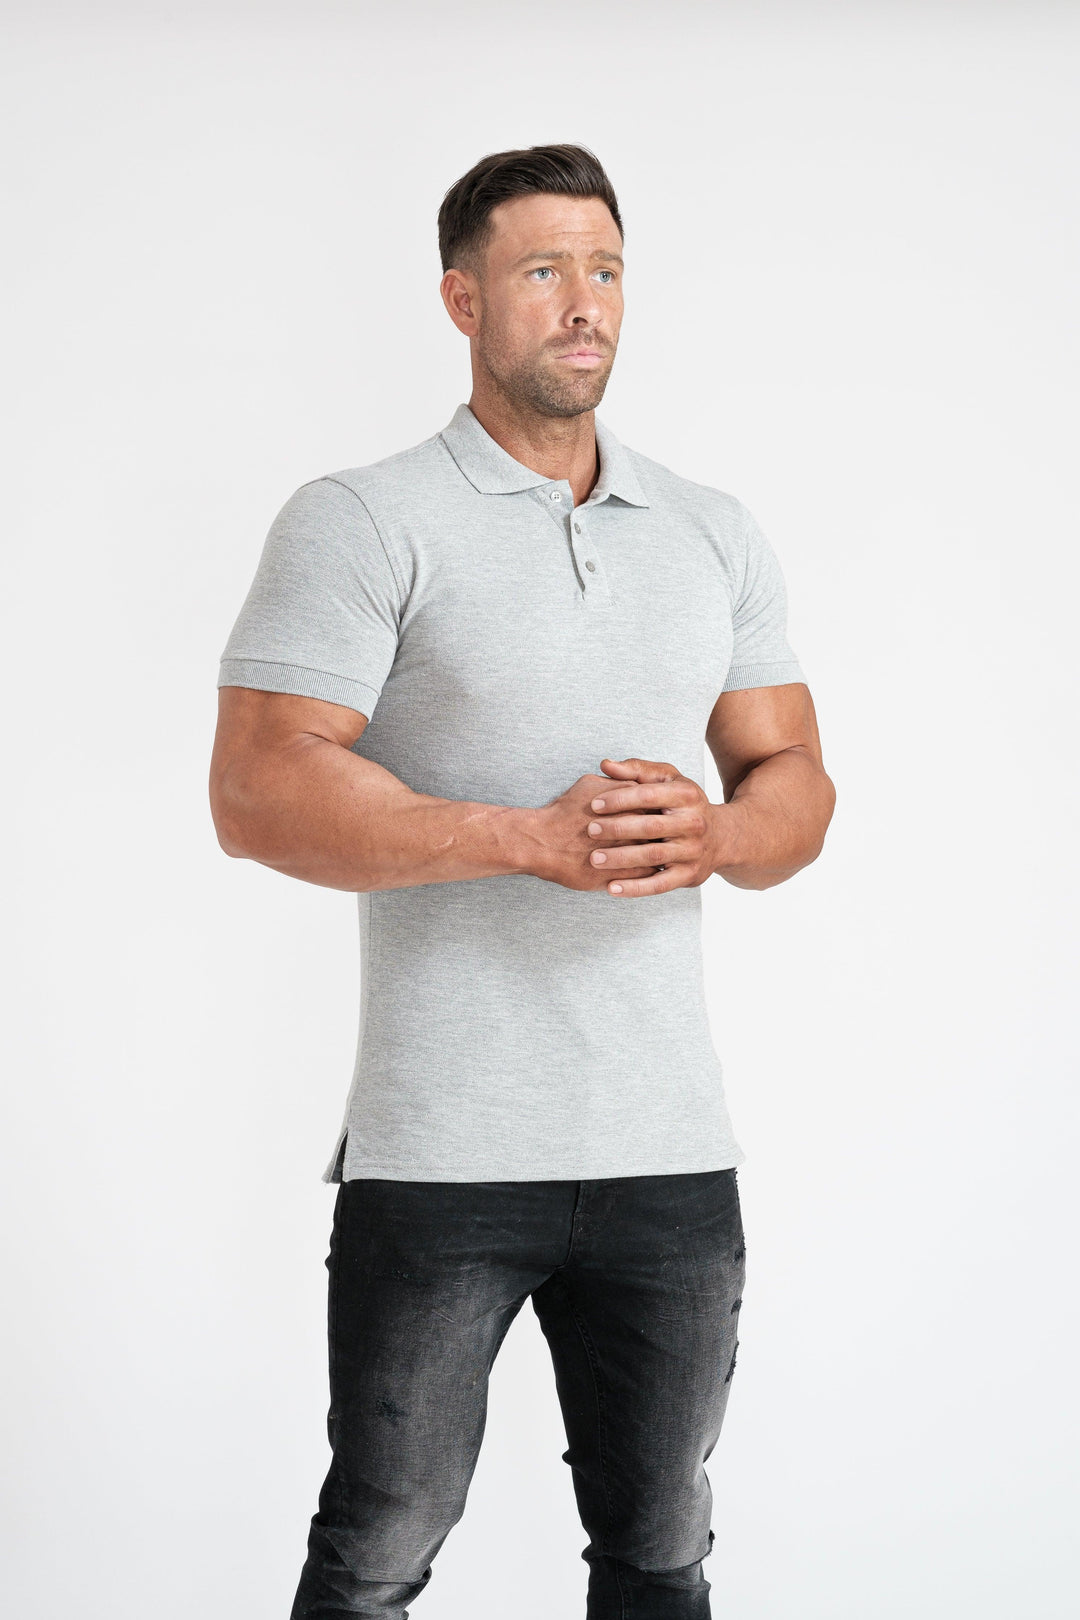 Grey Tapered Fit Polo Shirt For Men. A Proportionally Fitted and Tight Polo Shirt. Ideal for muscular guys.